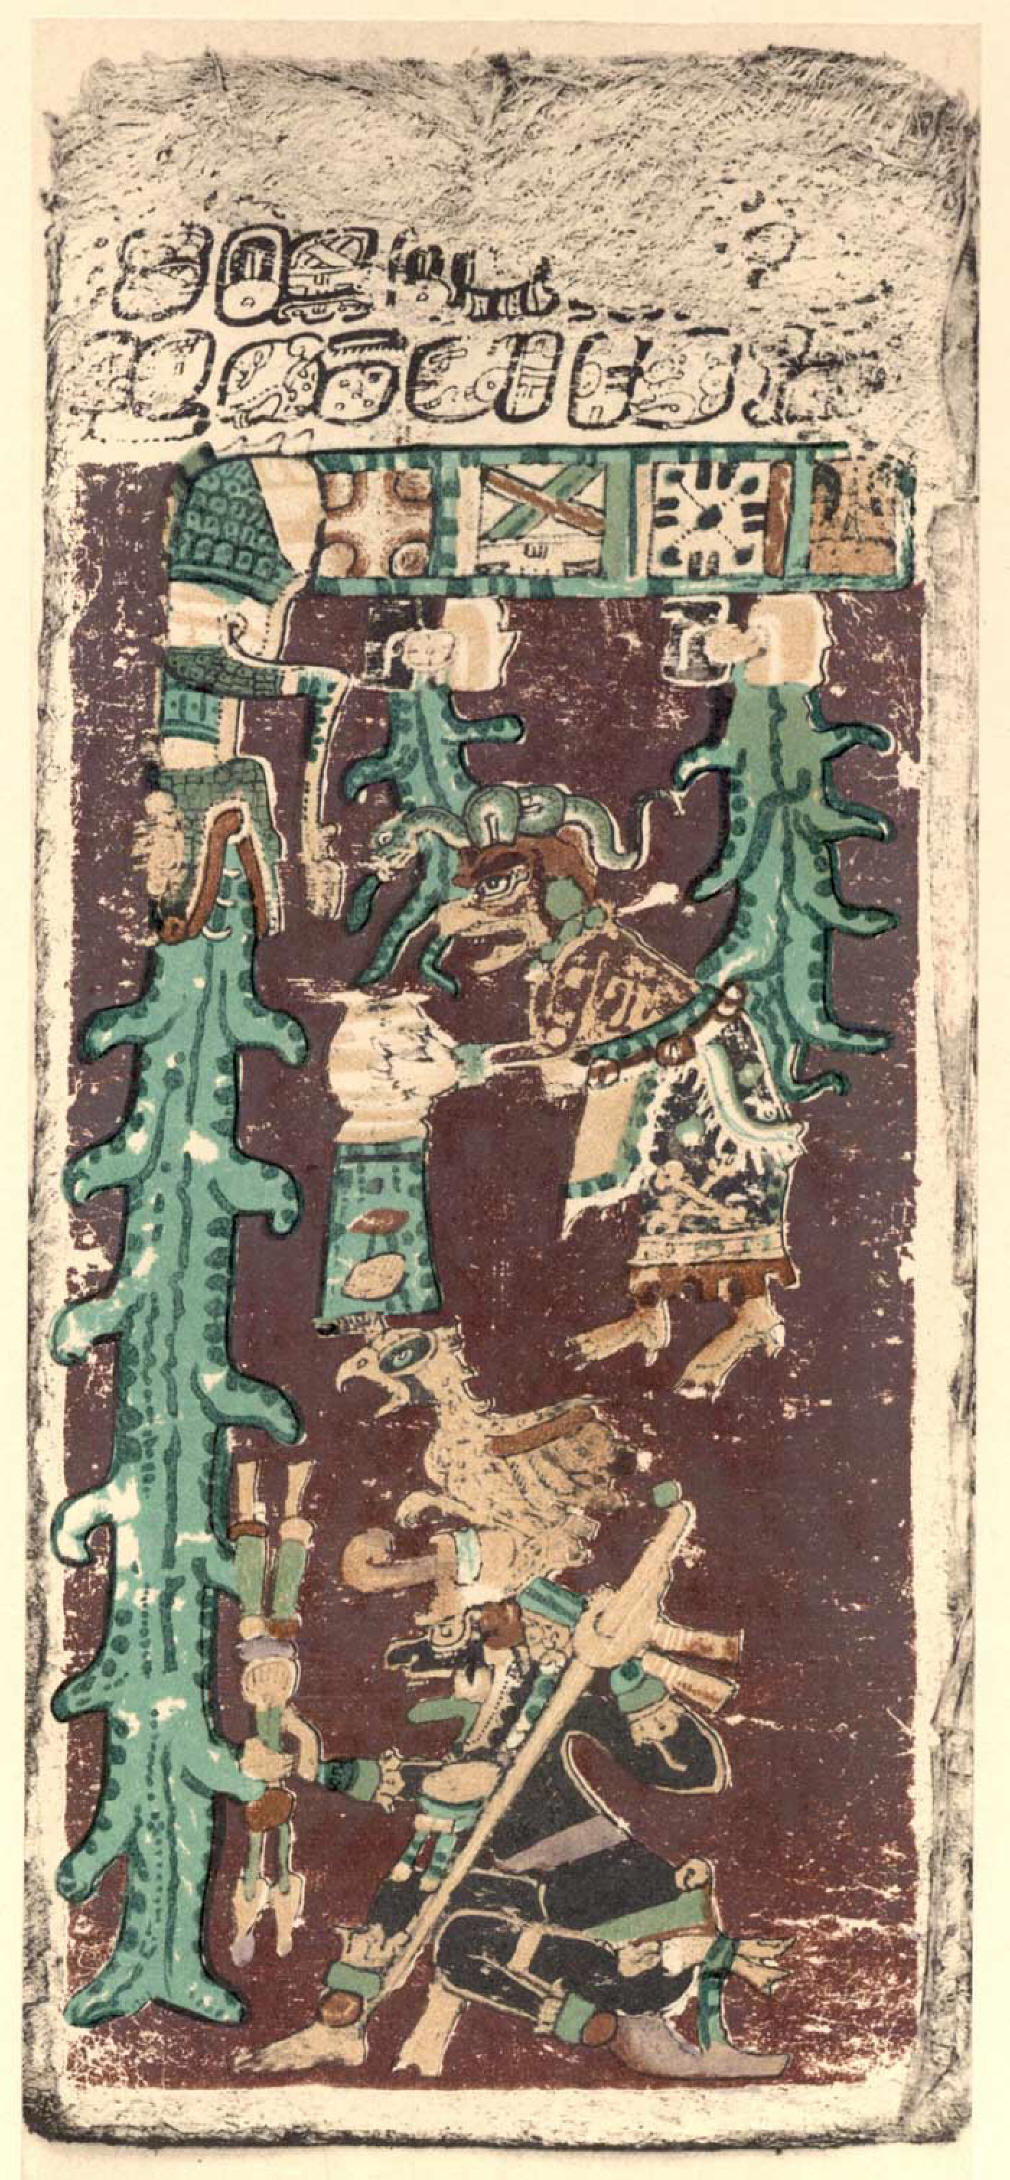 Mayan pictograph of a serpent pouring bowls of water out onto the earth.